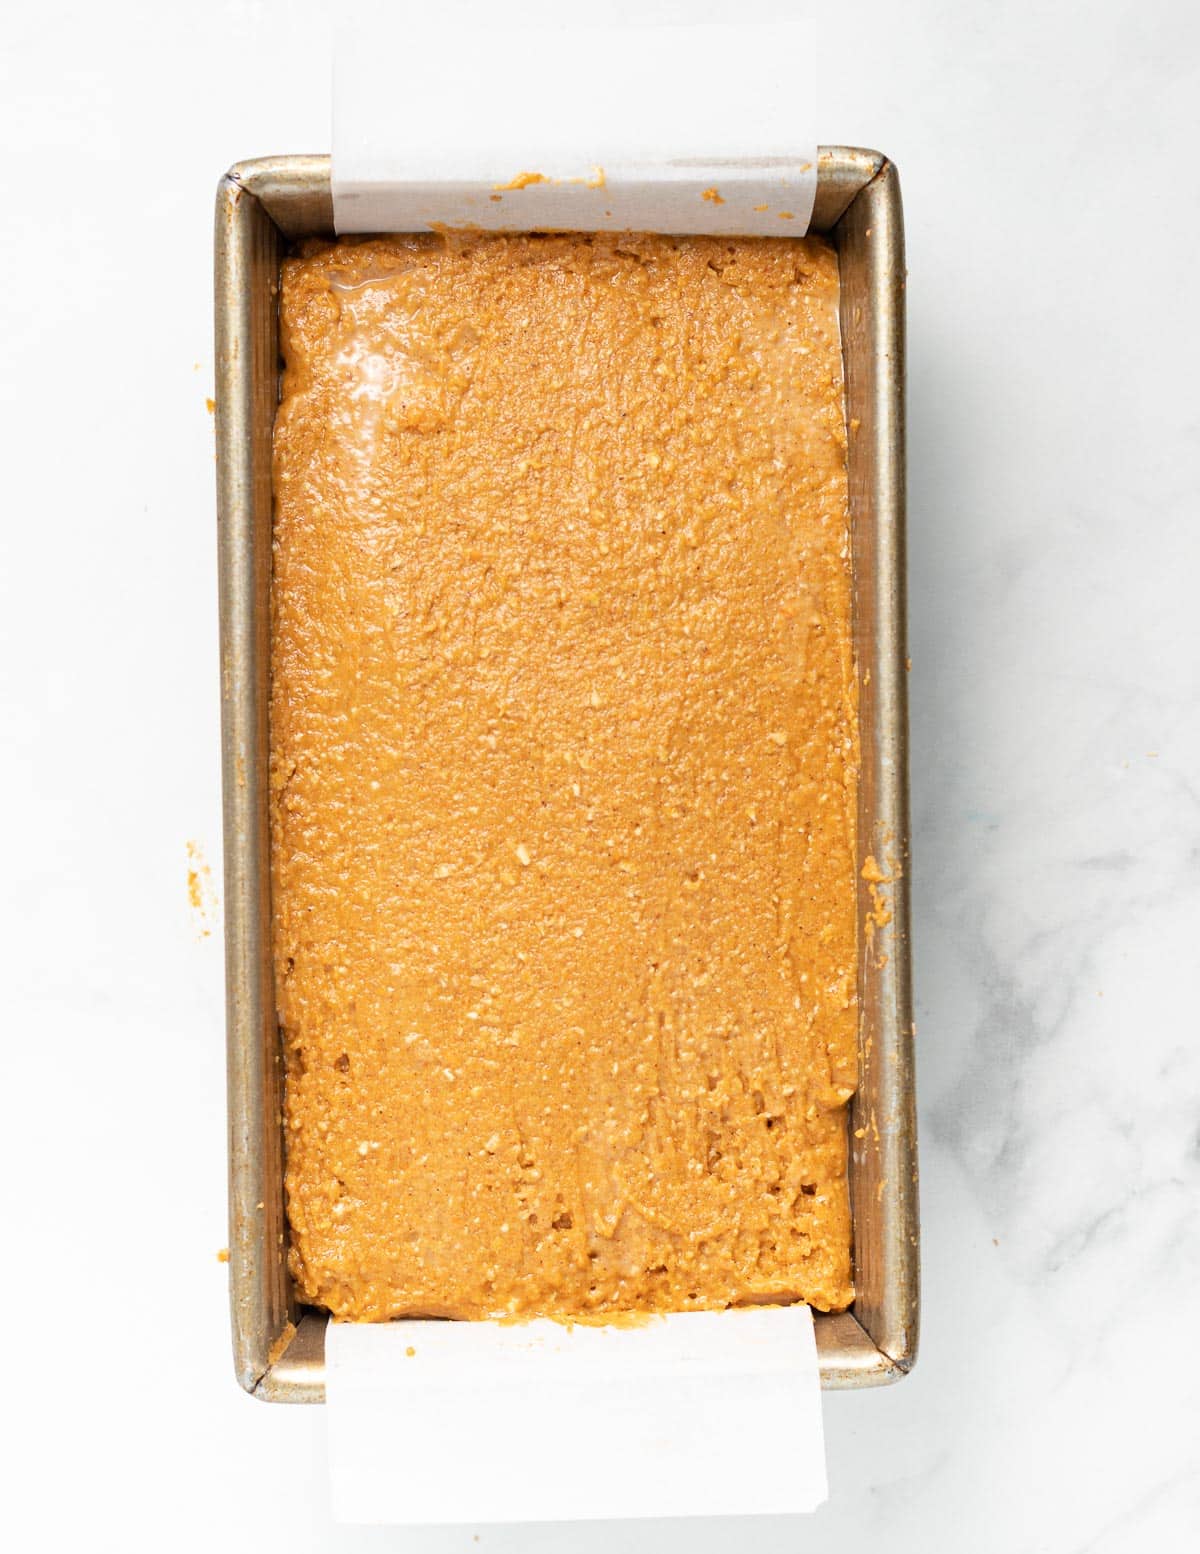 quick bread batter in a lined loaf pan